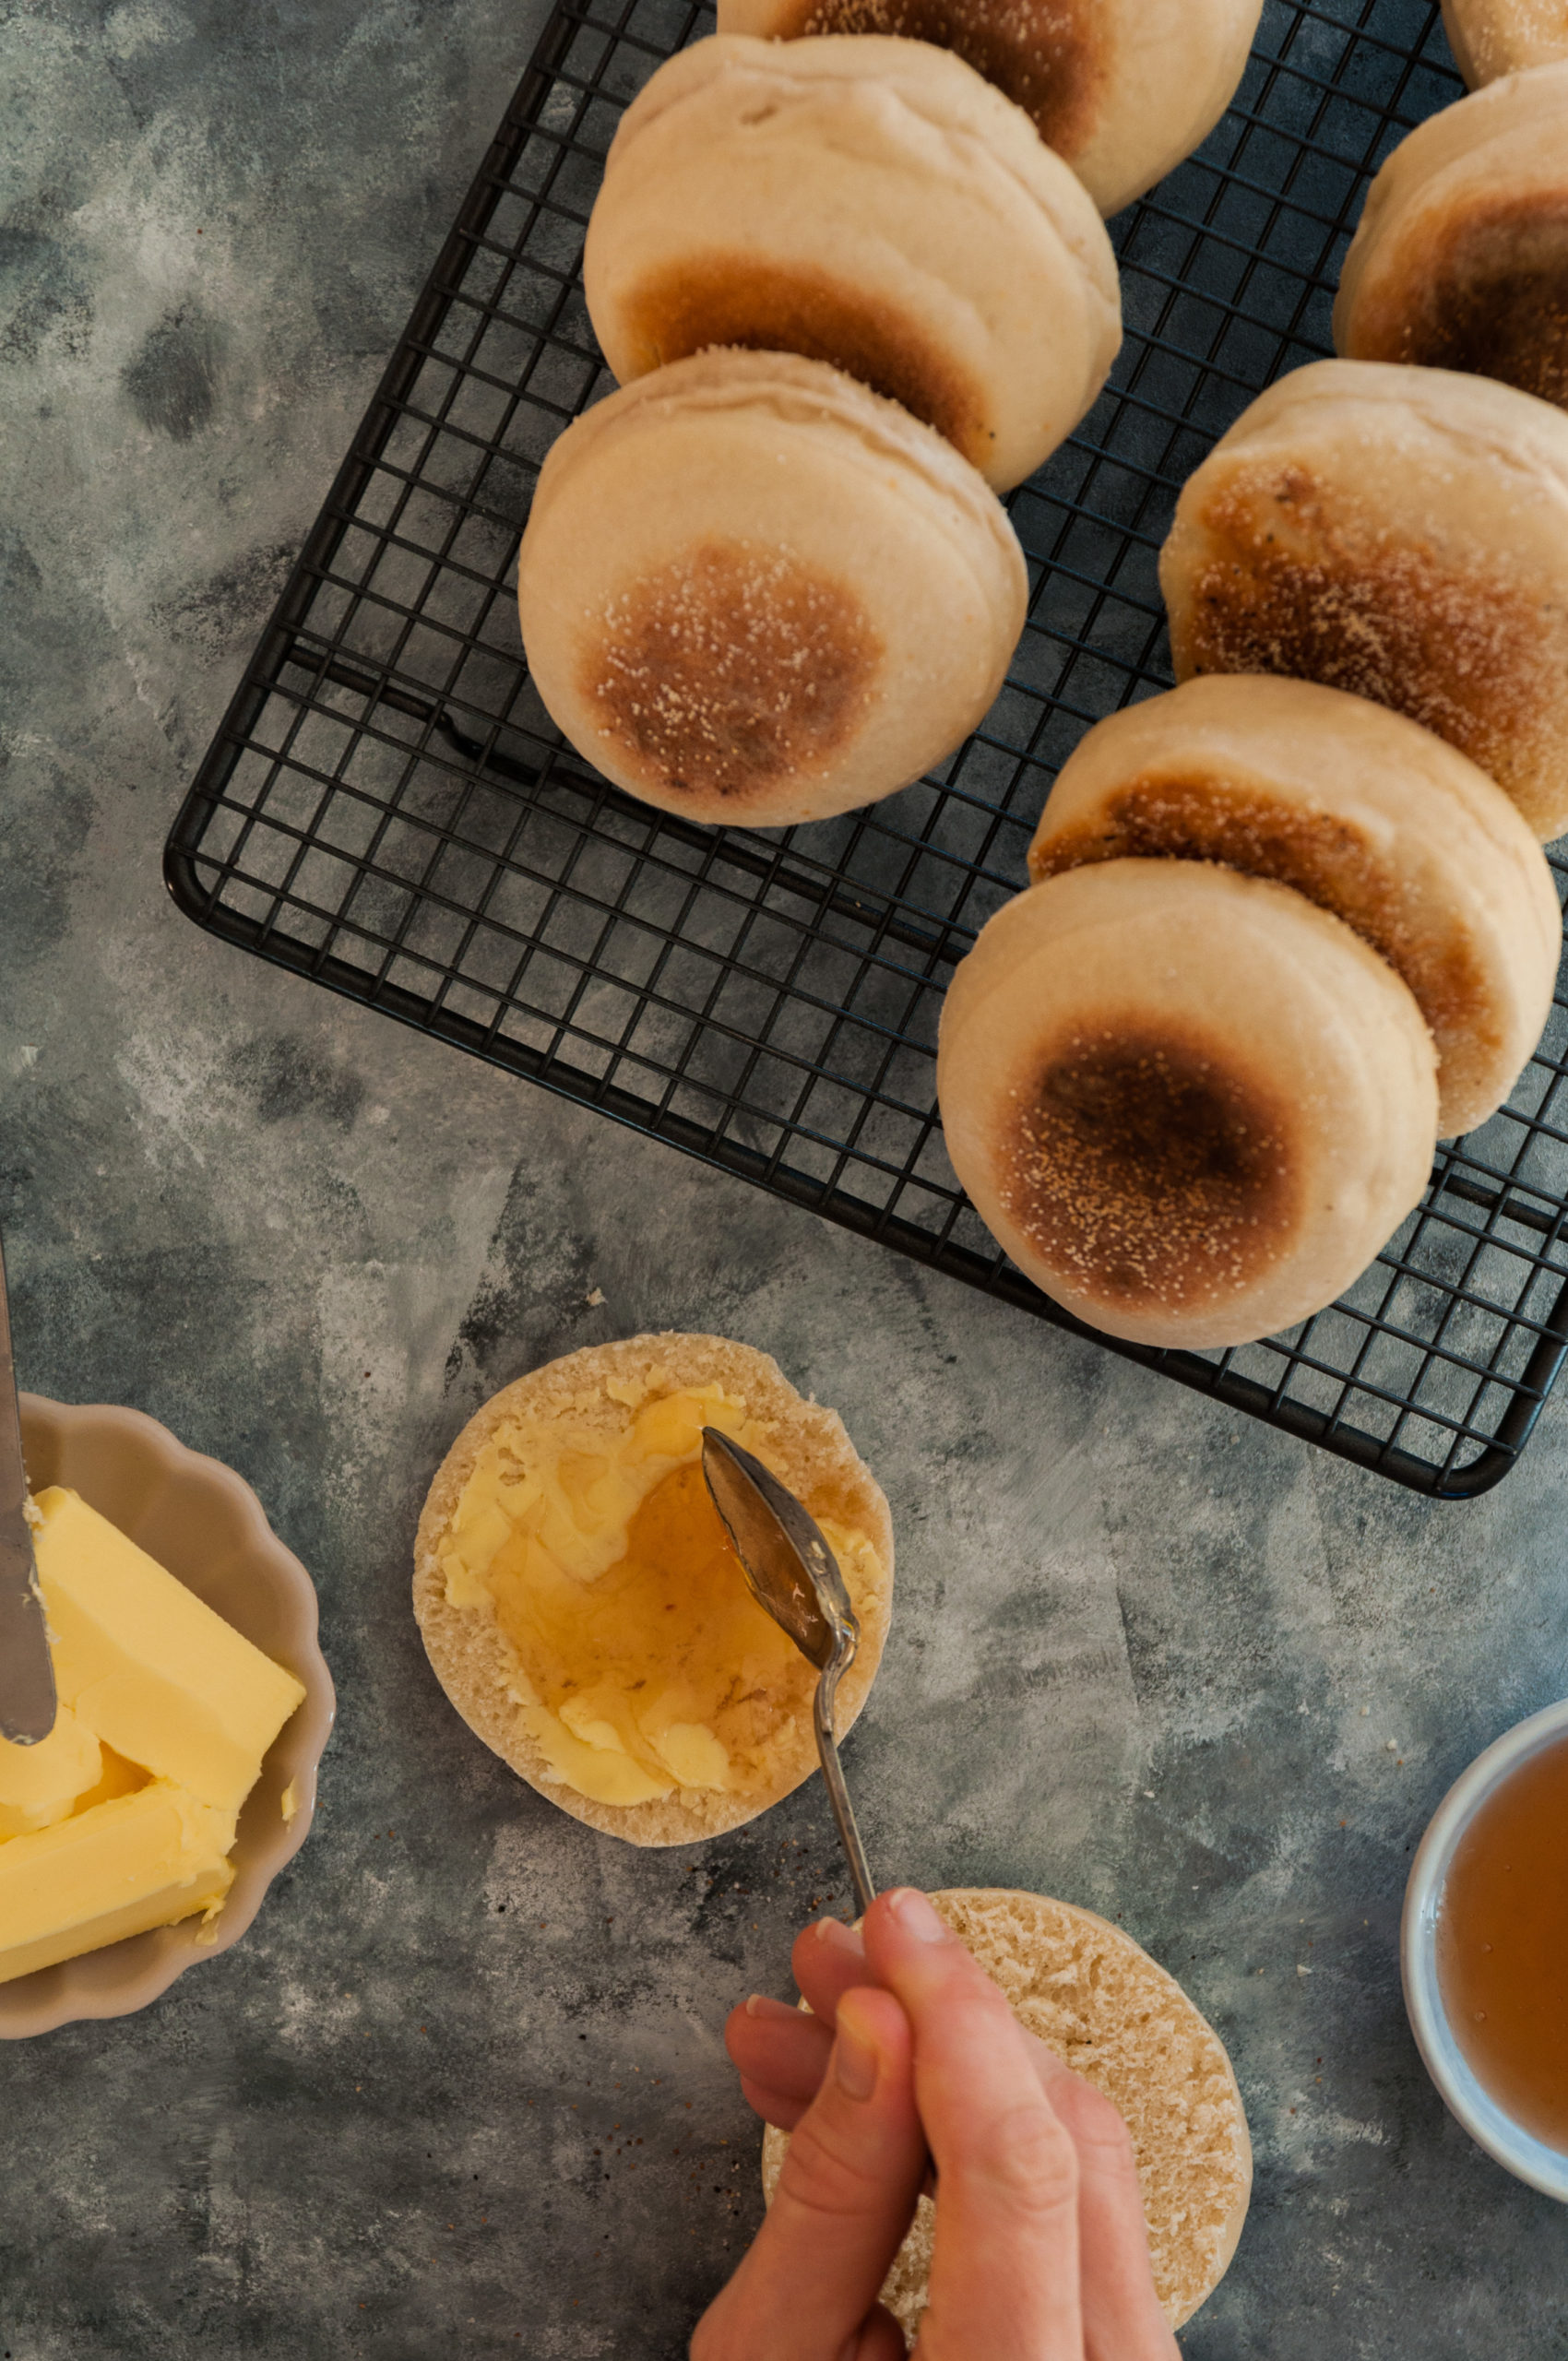 English muffins for great breakfast!